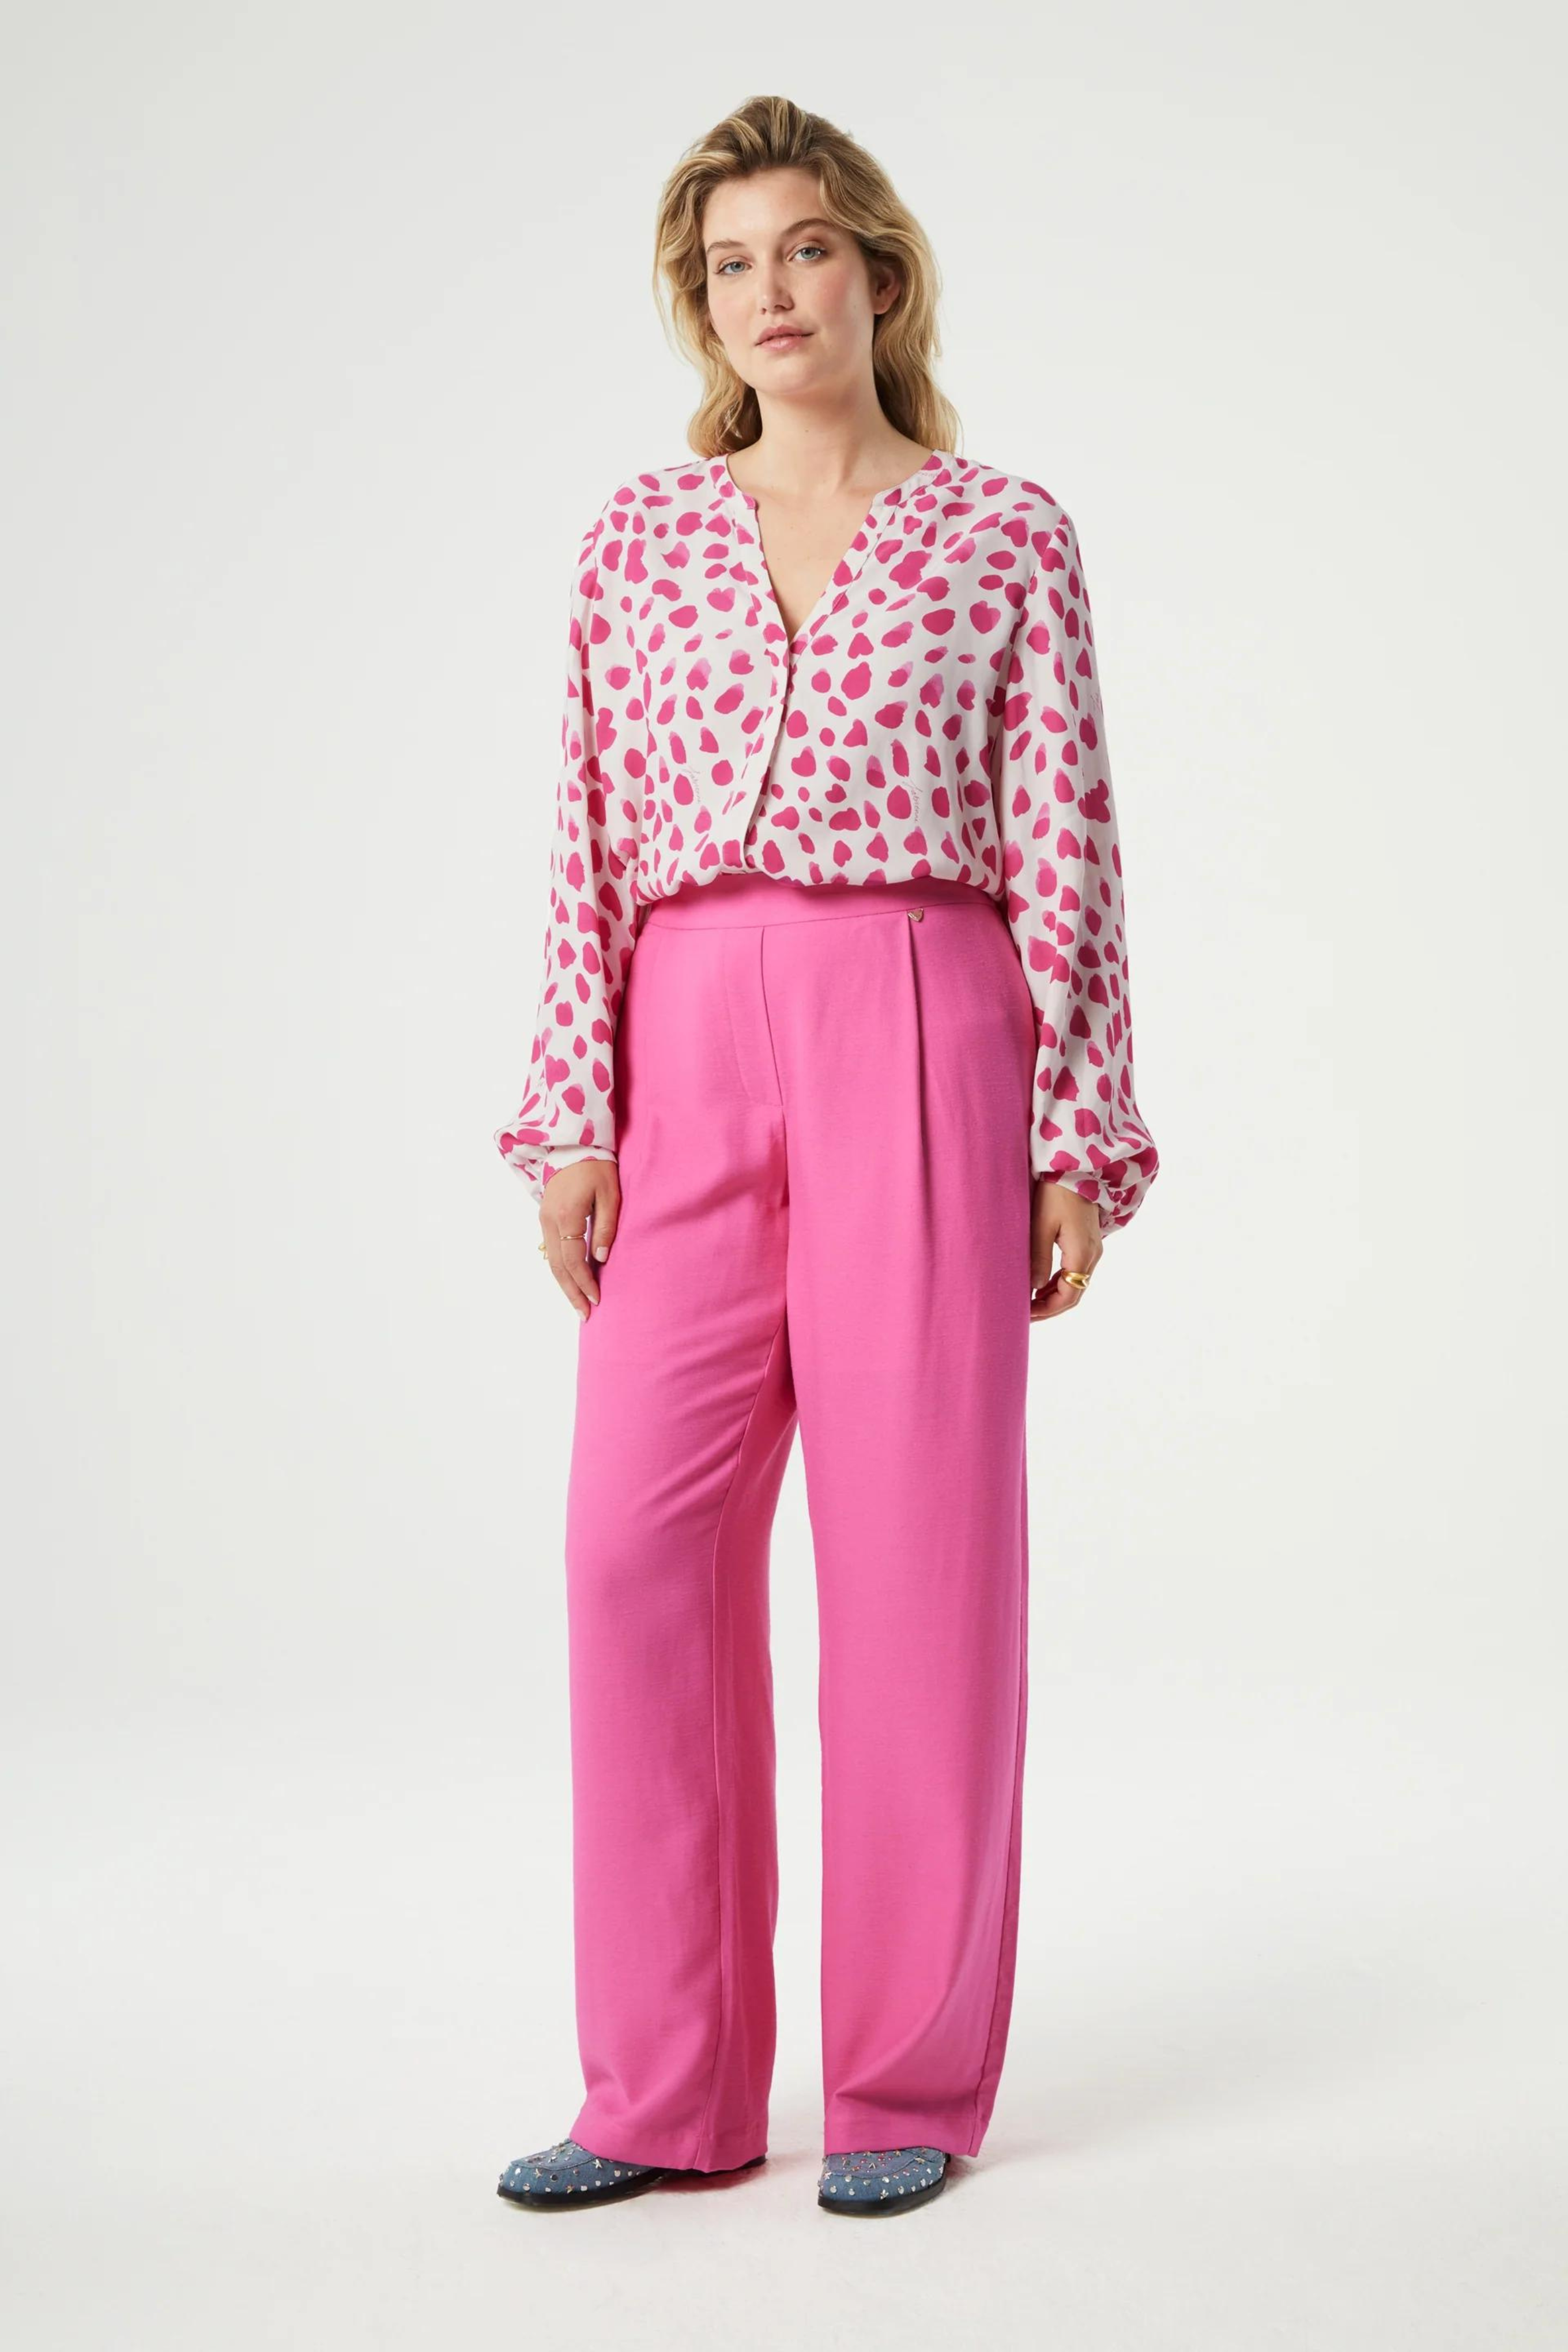 NEALE PANTS - PINK CANDY